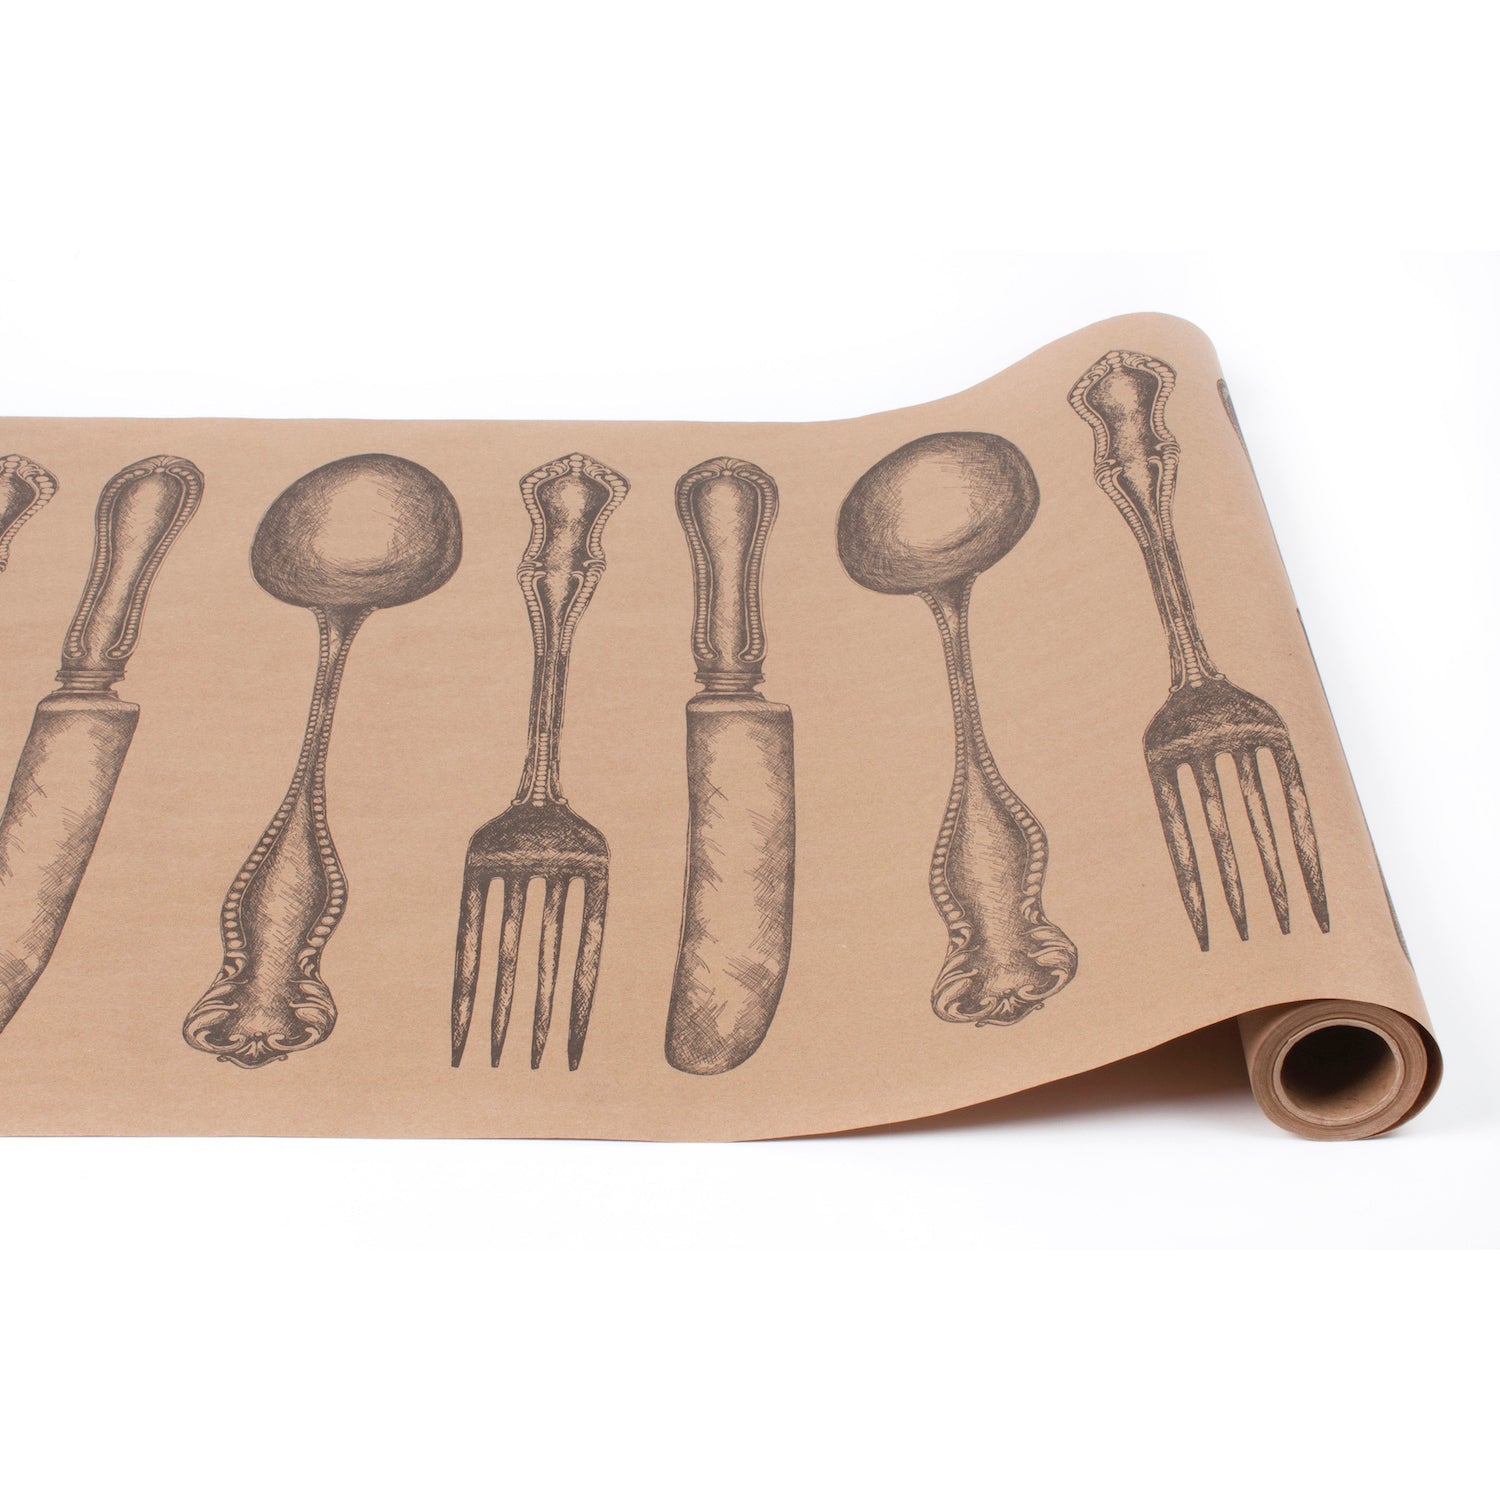 A kraft paper table runner featuring a repeating, engraving-style pattern of a fork, spoon and butter knife in black, evenly spaced down the length of the runner.